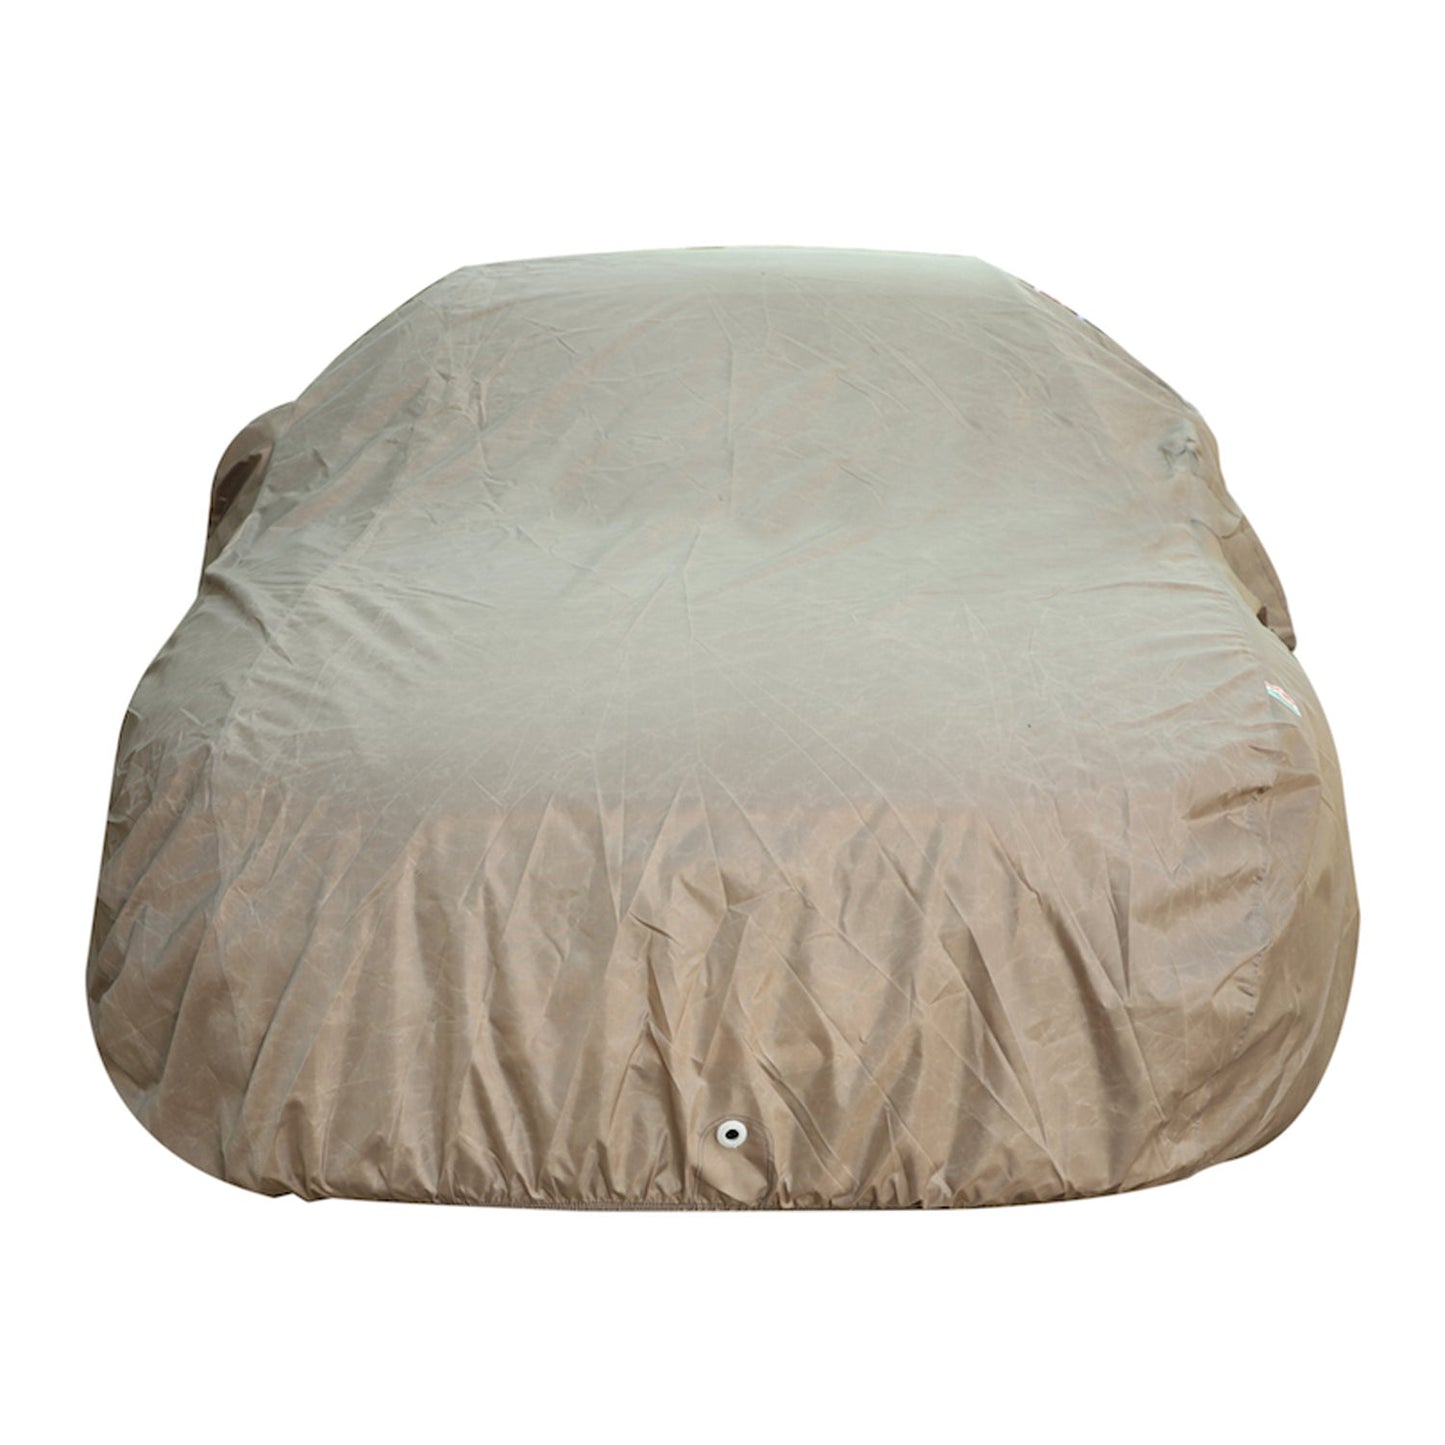 Oshotto Brown 100% Waterproof Car Body Cover with Mirror Pockets For Volkswagen Vento